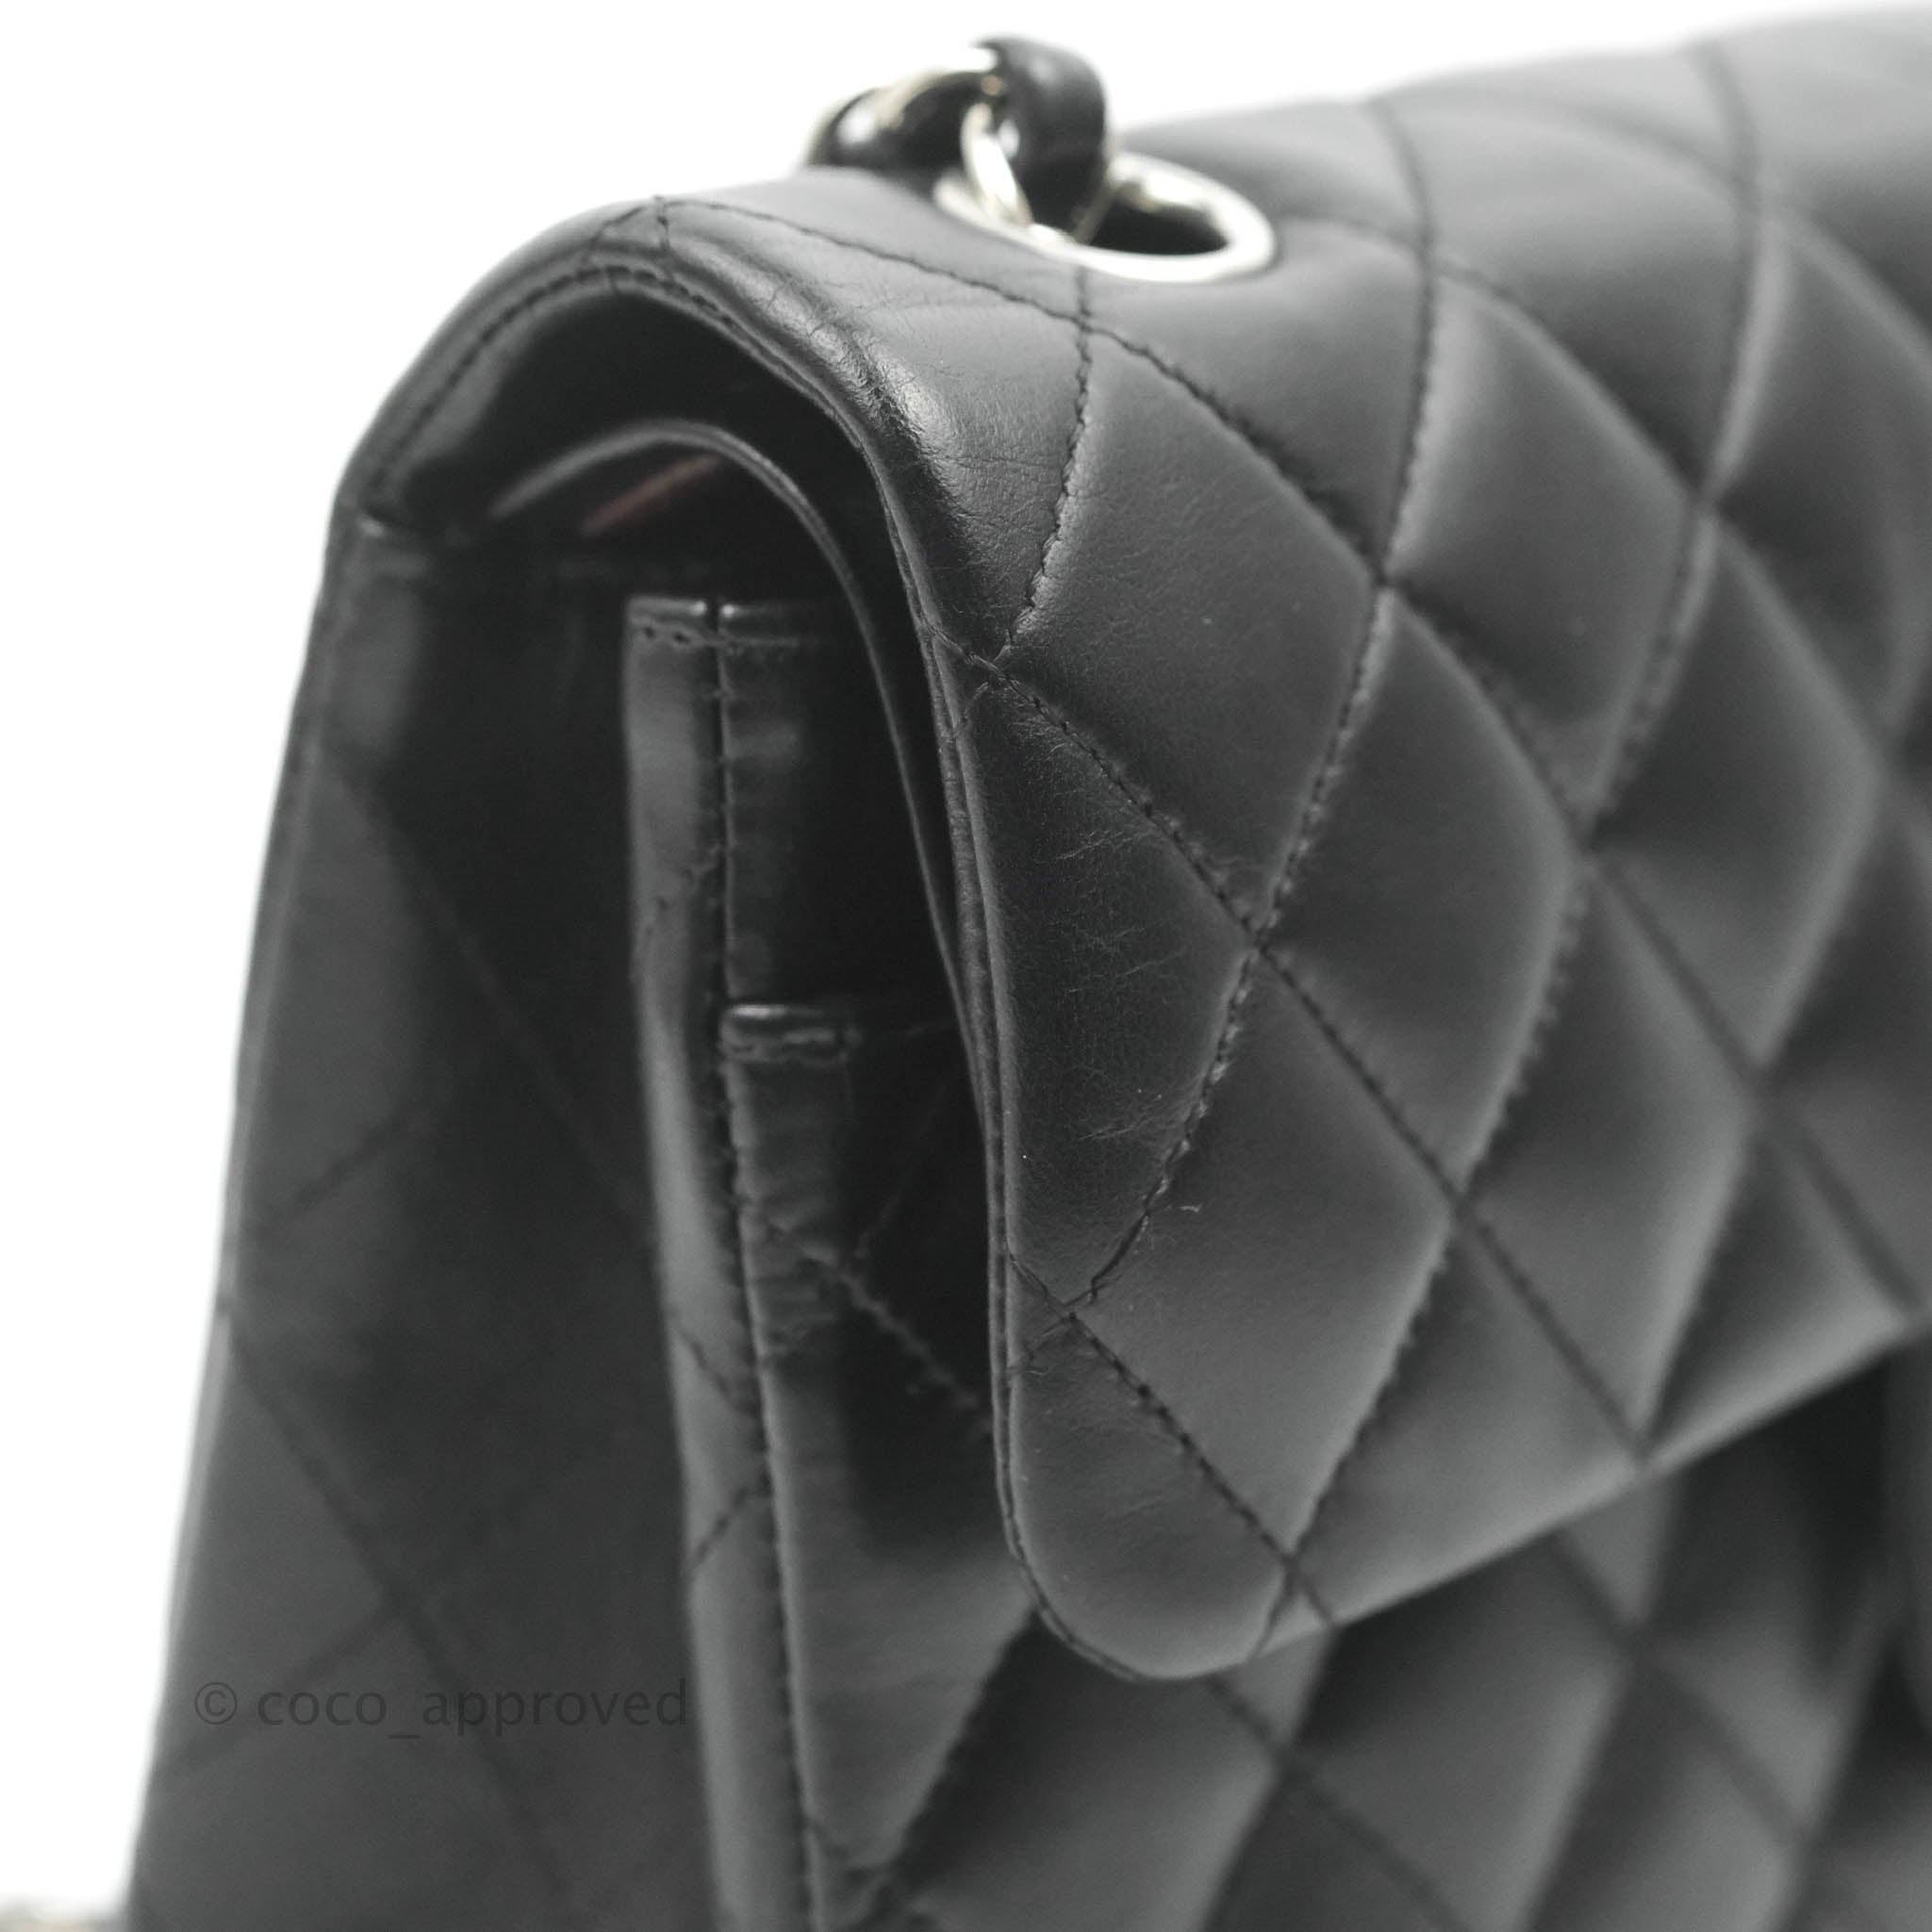 CHANEL Lambskin Quilted Mini Square Flap Black 102252